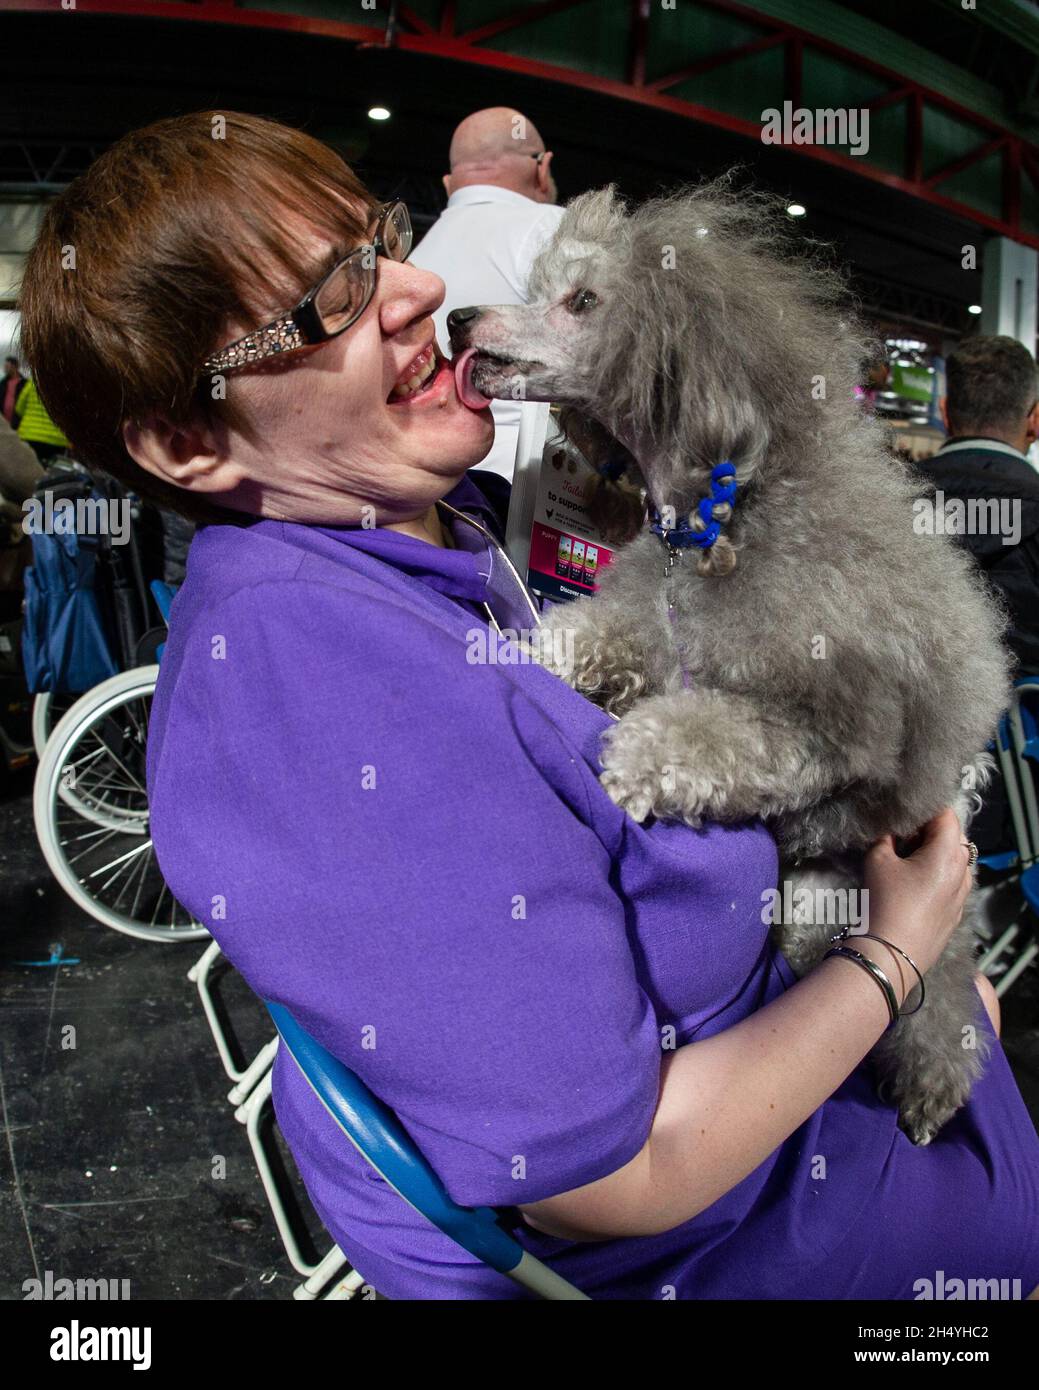 Woman holds her Miniature Poodle on day 4 of Crufts Dog Show at the National Exhibition Centre (NEC) on 10 March 2019 in Birmingham, England. Picture date: Sunday 10 March, 2019. Photo credit: Katja Ogrin/ EMPICS Entertainment. Stock Photo